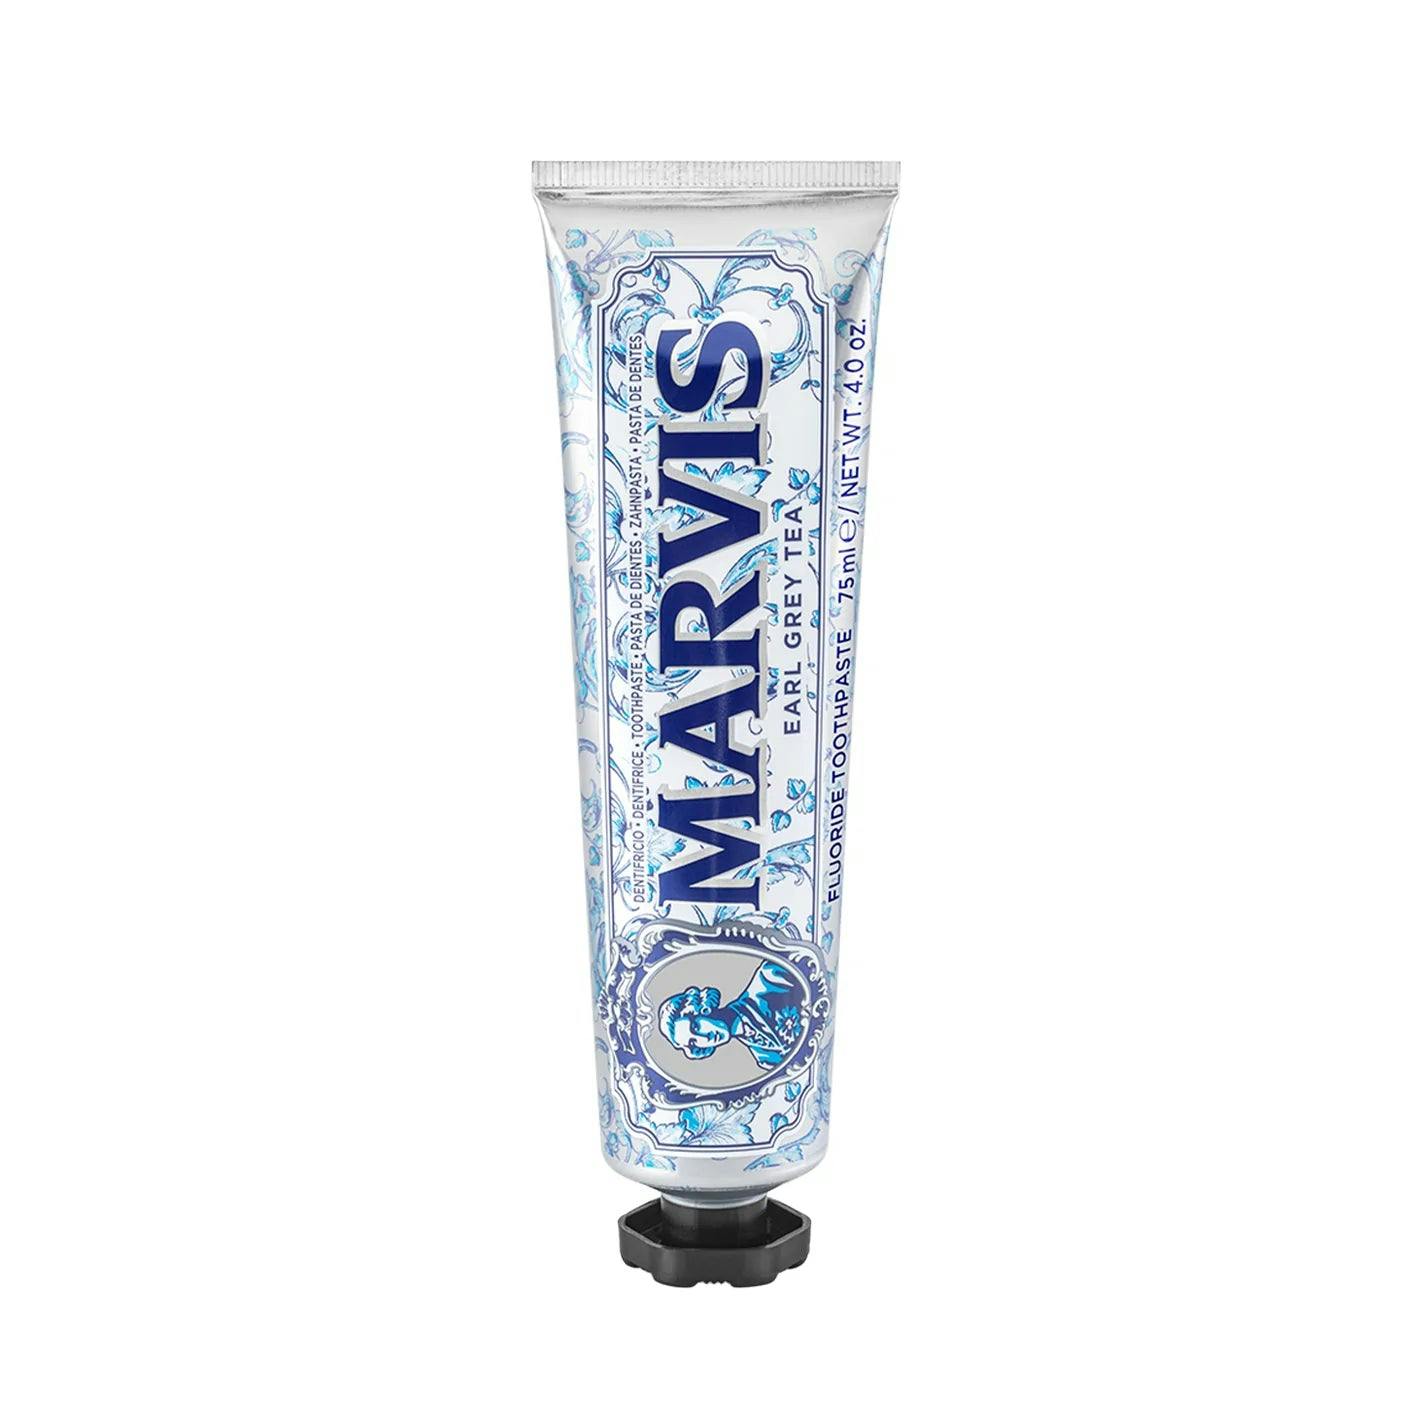 Marvis Earl Grey Toothpaste 75ml